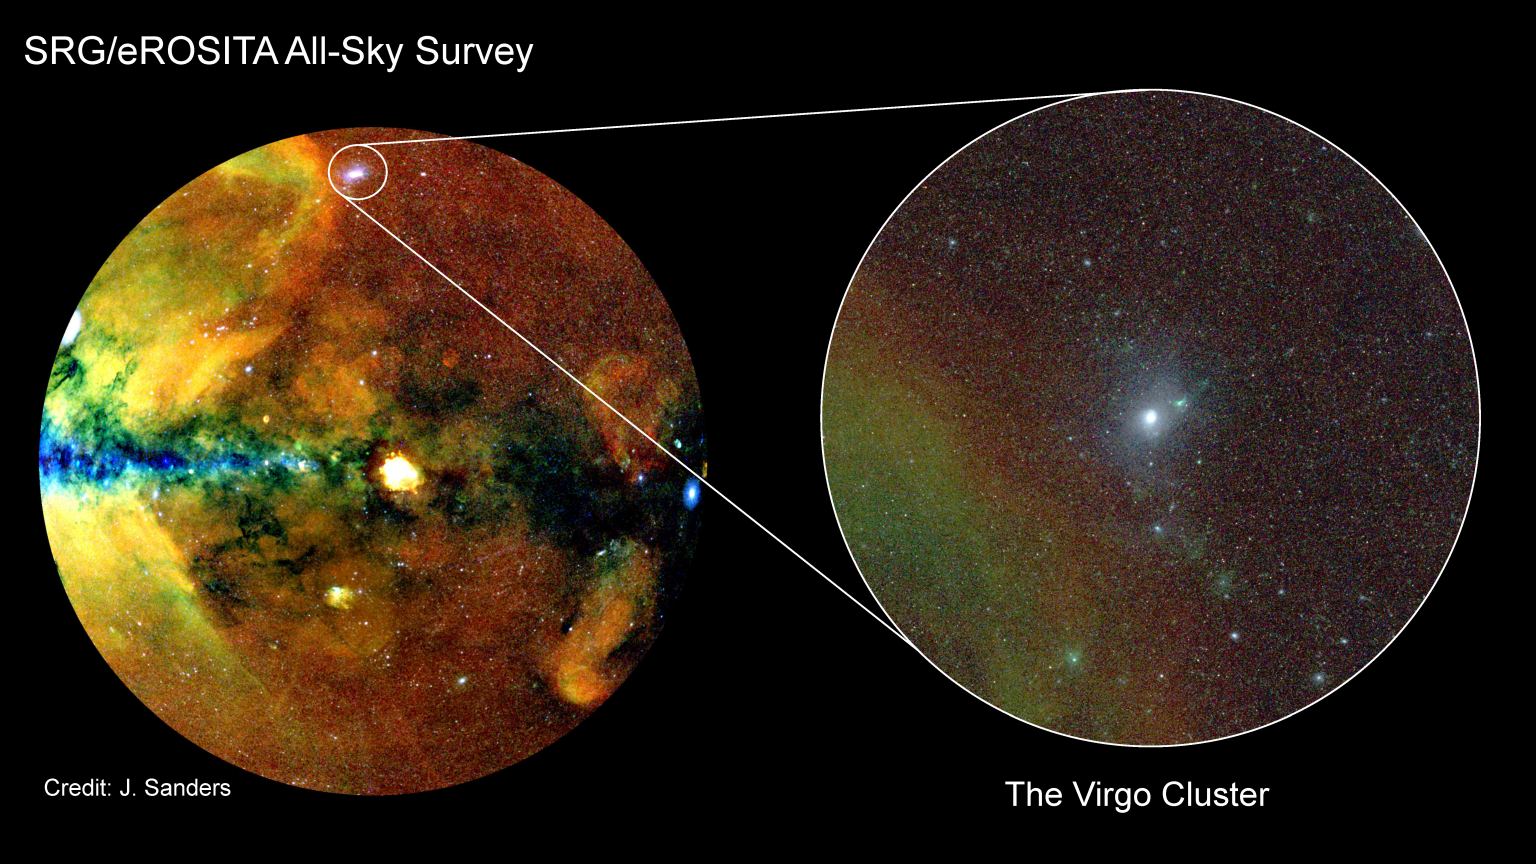 Cutout showing details of Virgo Cluster in X-rays